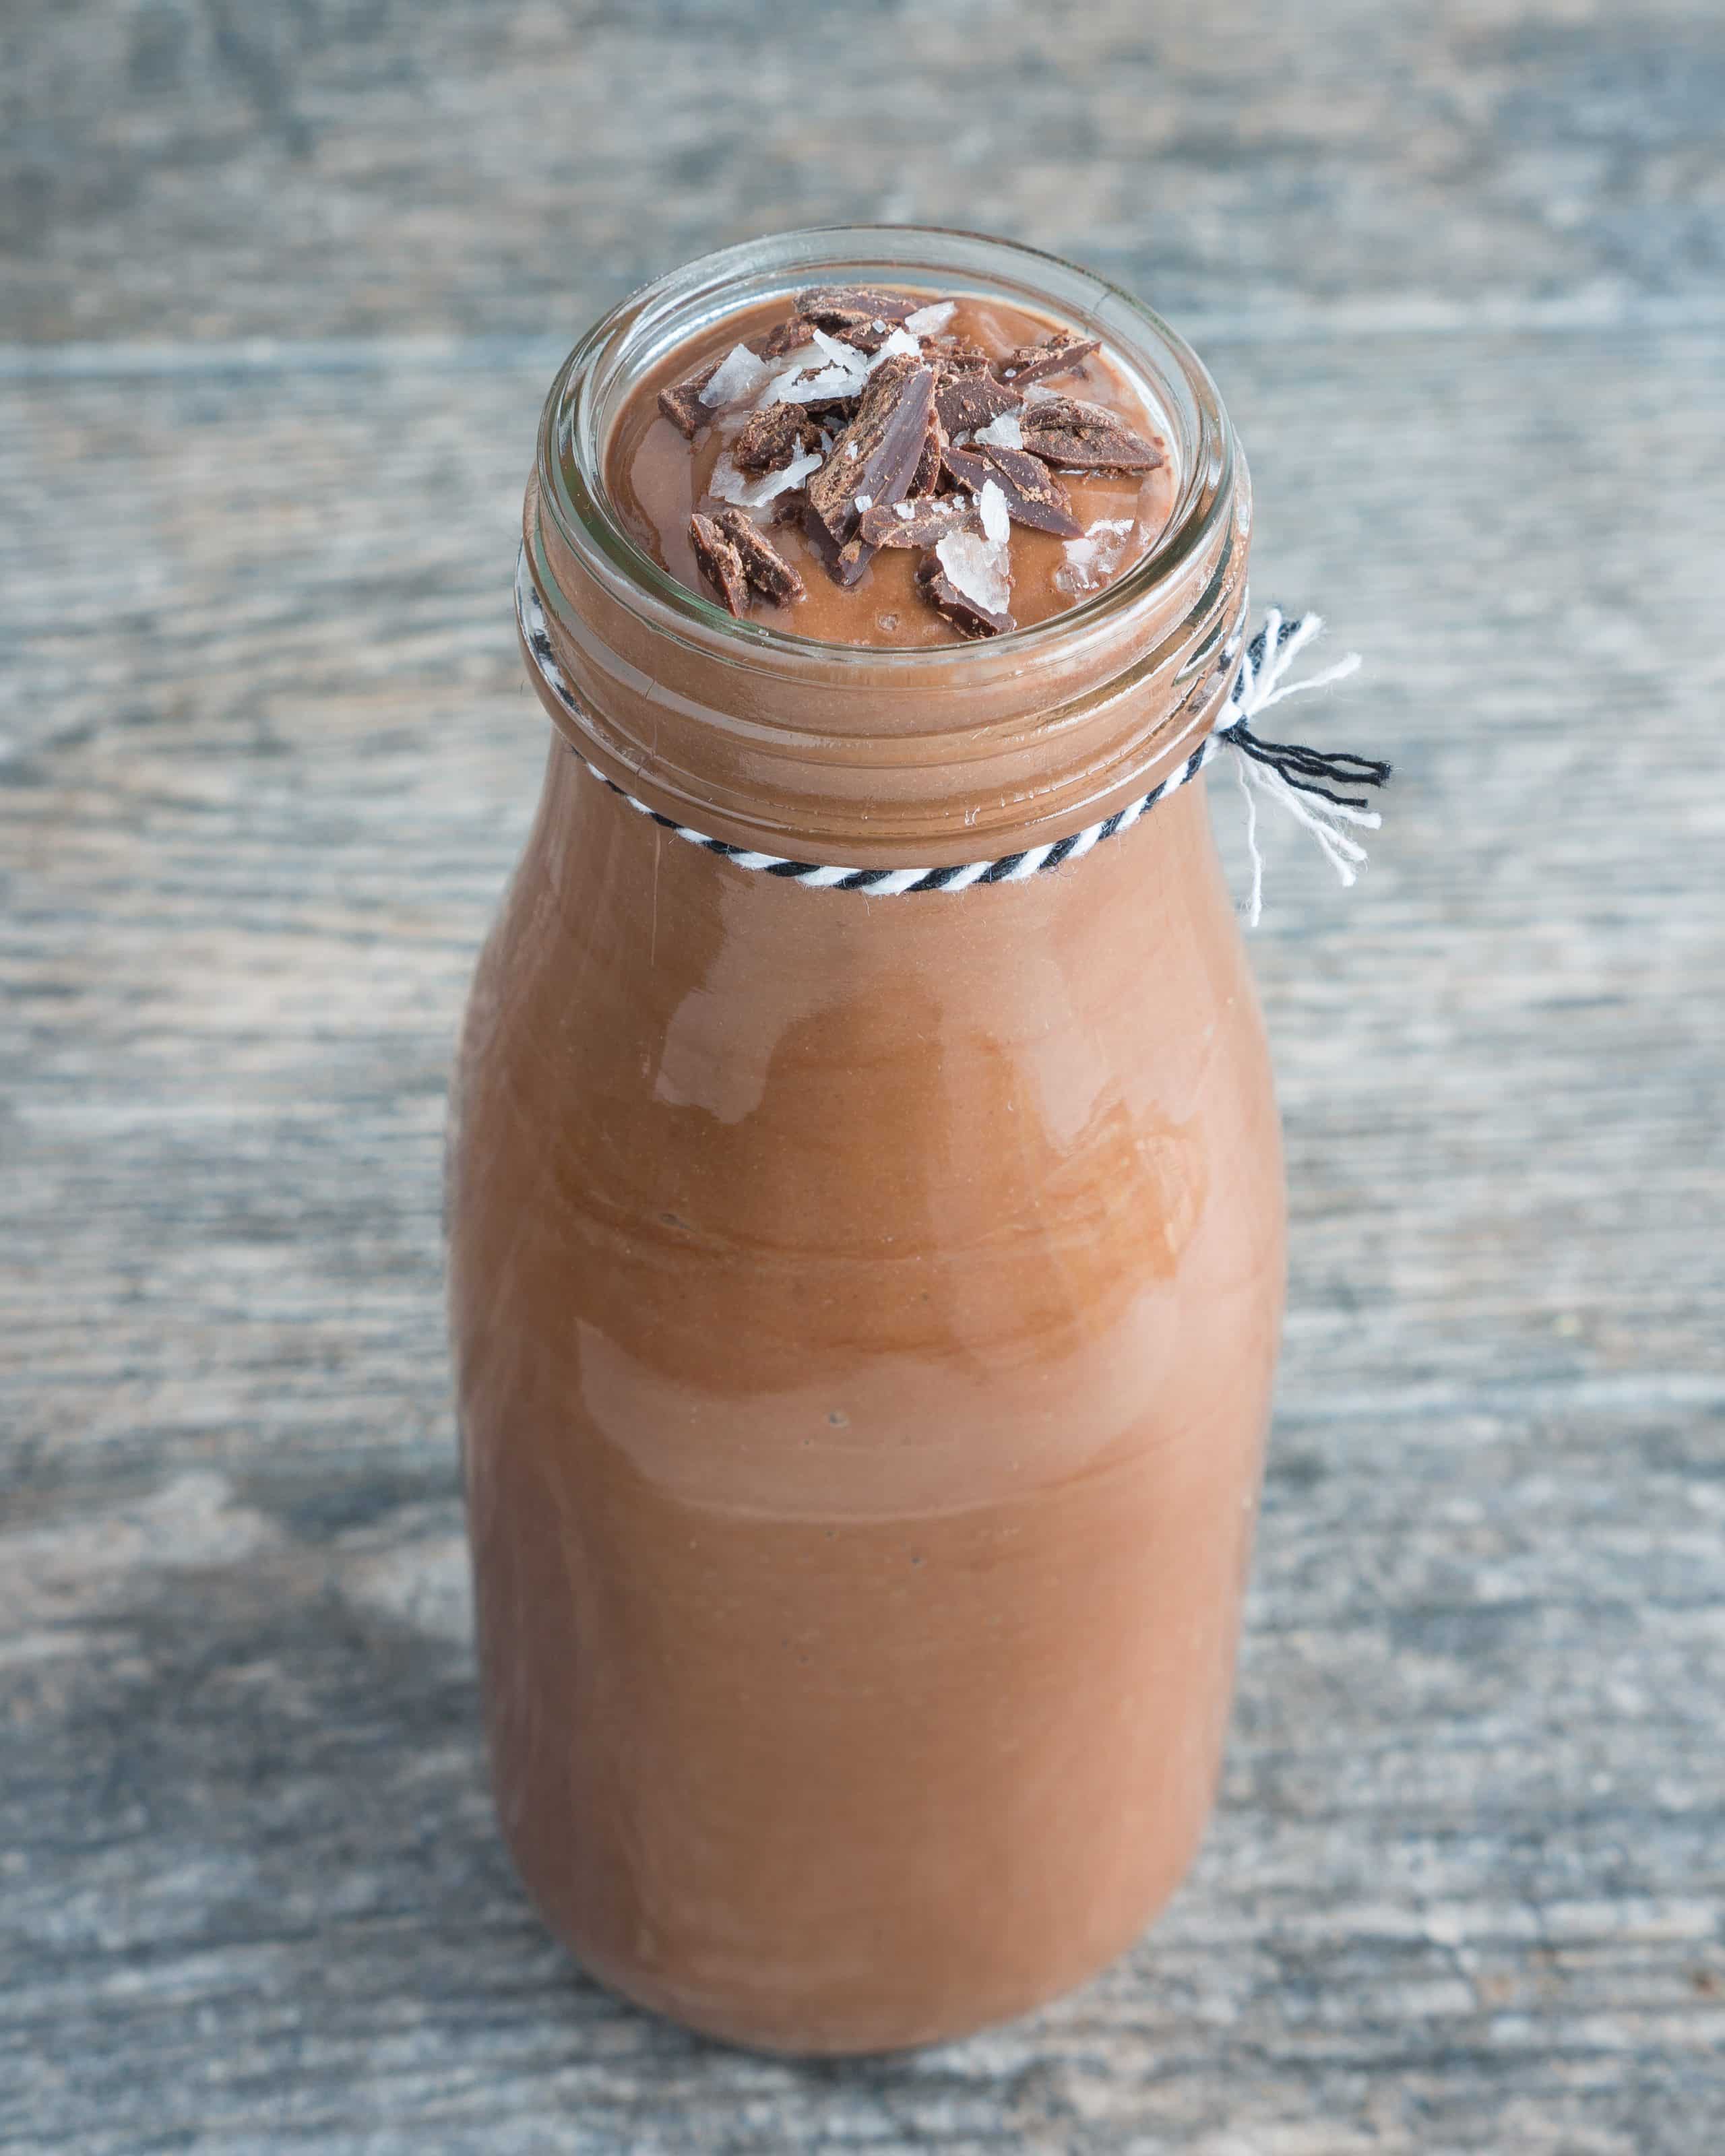 Glass of chocolate banana smoothie with chocolate shavings and salt on top with a wood background